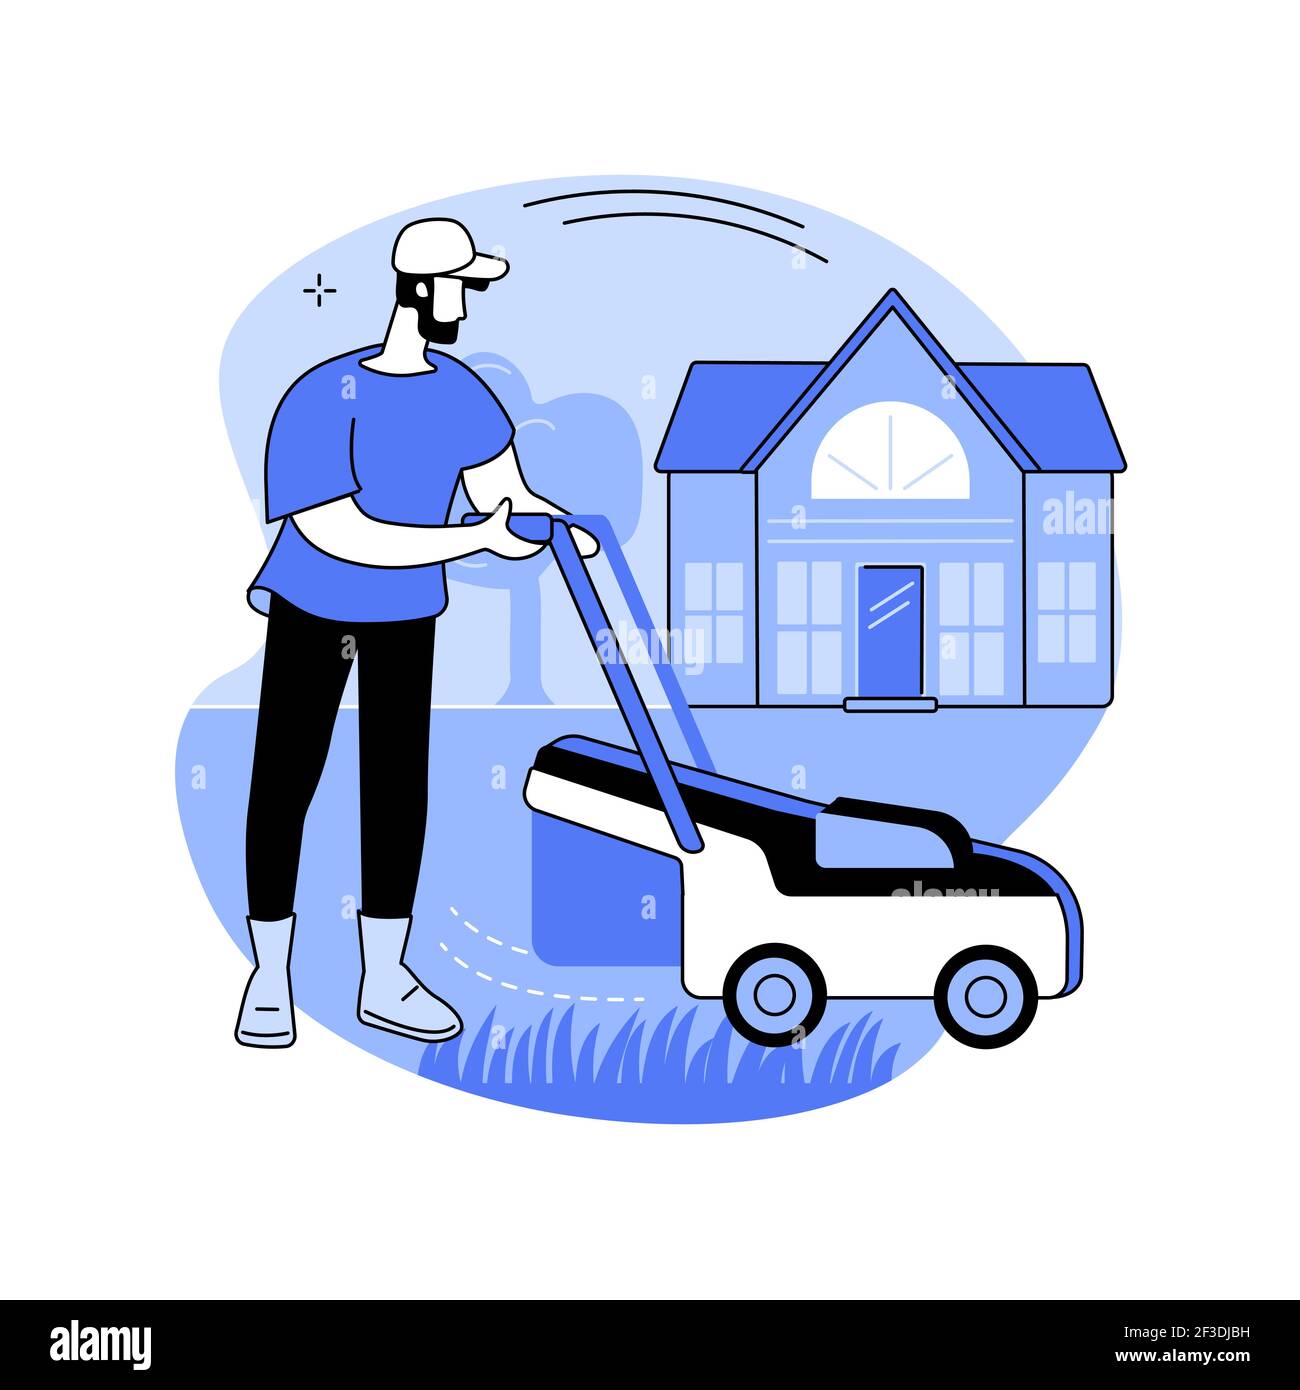 Lawn mowing service abstract concept vector illustration. Stock Vector